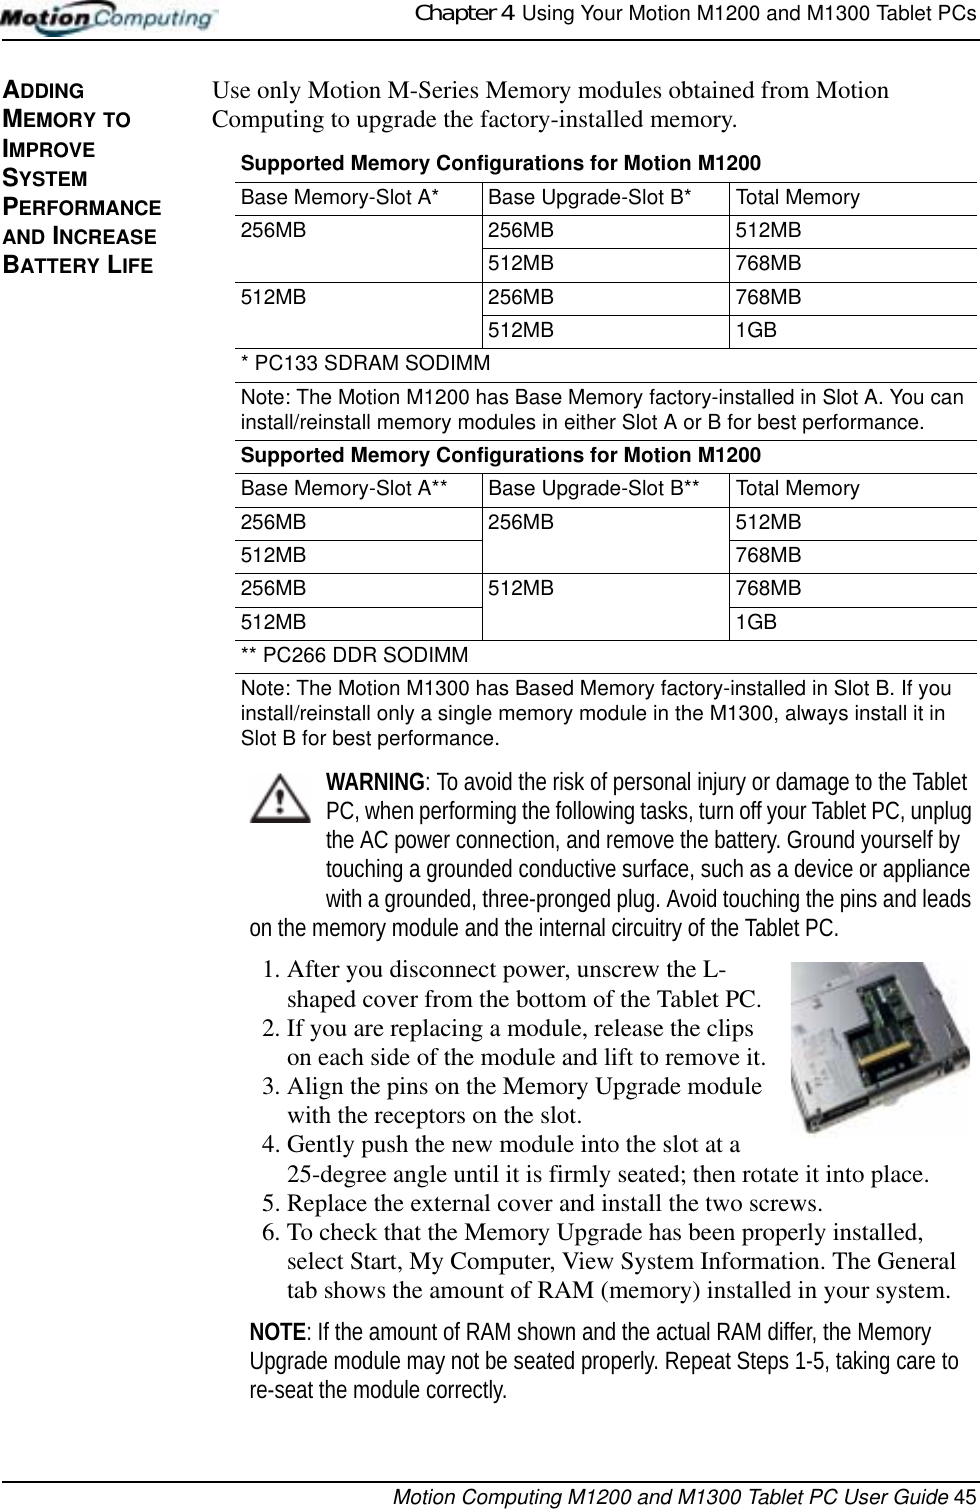 Chapter 4  Using Your Motion M1200 and M1300 Tablet PCsMotion Computing M1200 and M1300 Tablet PC User Guide 45ADDING MEMORY TO IMPROVE SYSTEM PERFORMANCE AND INCREASE BATTERY LIFEUse only Motion M-Series Memory modules obtained from Motion Computing to upgrade the factory-installed memory.WARNING: To avoid the risk of personal injury or damage to the Tablet PC, when performing the following tasks, turn off your Tablet PC, unplug the AC power connection, and remove the battery. Ground yourself by touching a grounded conductive surface, such as a device or appliance with a grounded, three-pronged plug. Avoid touching the pins and leads on the memory module and the internal circuitry of the Tablet PC.1. After you disconnect power, unscrew the L-shaped cover from the bottom of the Tablet PC. 2. If you are replacing a module, release the clips on each side of the module and lift to remove it.3. Align the pins on the Memory Upgrade module with the receptors on the slot. 4. Gently push the new module into the slot at a 25-degree angle until it is firmly seated; then rotate it into place.5. Replace the external cover and install the two screws. 6. To check that the Memory Upgrade has been properly installed, select Start, My Computer, View System Information. The General tab shows the amount of RAM (memory) installed in your system.NOTE: If the amount of RAM shown and the actual RAM differ, the Memory Upgrade module may not be seated properly. Repeat Steps 1-5, taking care to re-seat the module correctly.Supported Memory Configurations for Motion M1200Base Memory-Slot A* Base Upgrade-Slot B* Total Memory256MB 256MB 512MB512MB 768MB512MB 256MB 768MB512MB 1GB* PC133 SDRAM SODIMMNote: The Motion M1200 has Base Memory factory-installed in Slot A. You can install/reinstall memory modules in either Slot A or B for best performance.Supported Memory Configurations for Motion M1200Base Memory-Slot A** Base Upgrade-Slot B** Total Memory256MB 256MB 512MB512MB 768MB256MB 512MB 768MB512MB 1GB** PC266 DDR SODIMMNote: The Motion M1300 has Based Memory factory-installed in Slot B. If you install/reinstall only a single memory module in the M1300, always install it in Slot B for best performance.